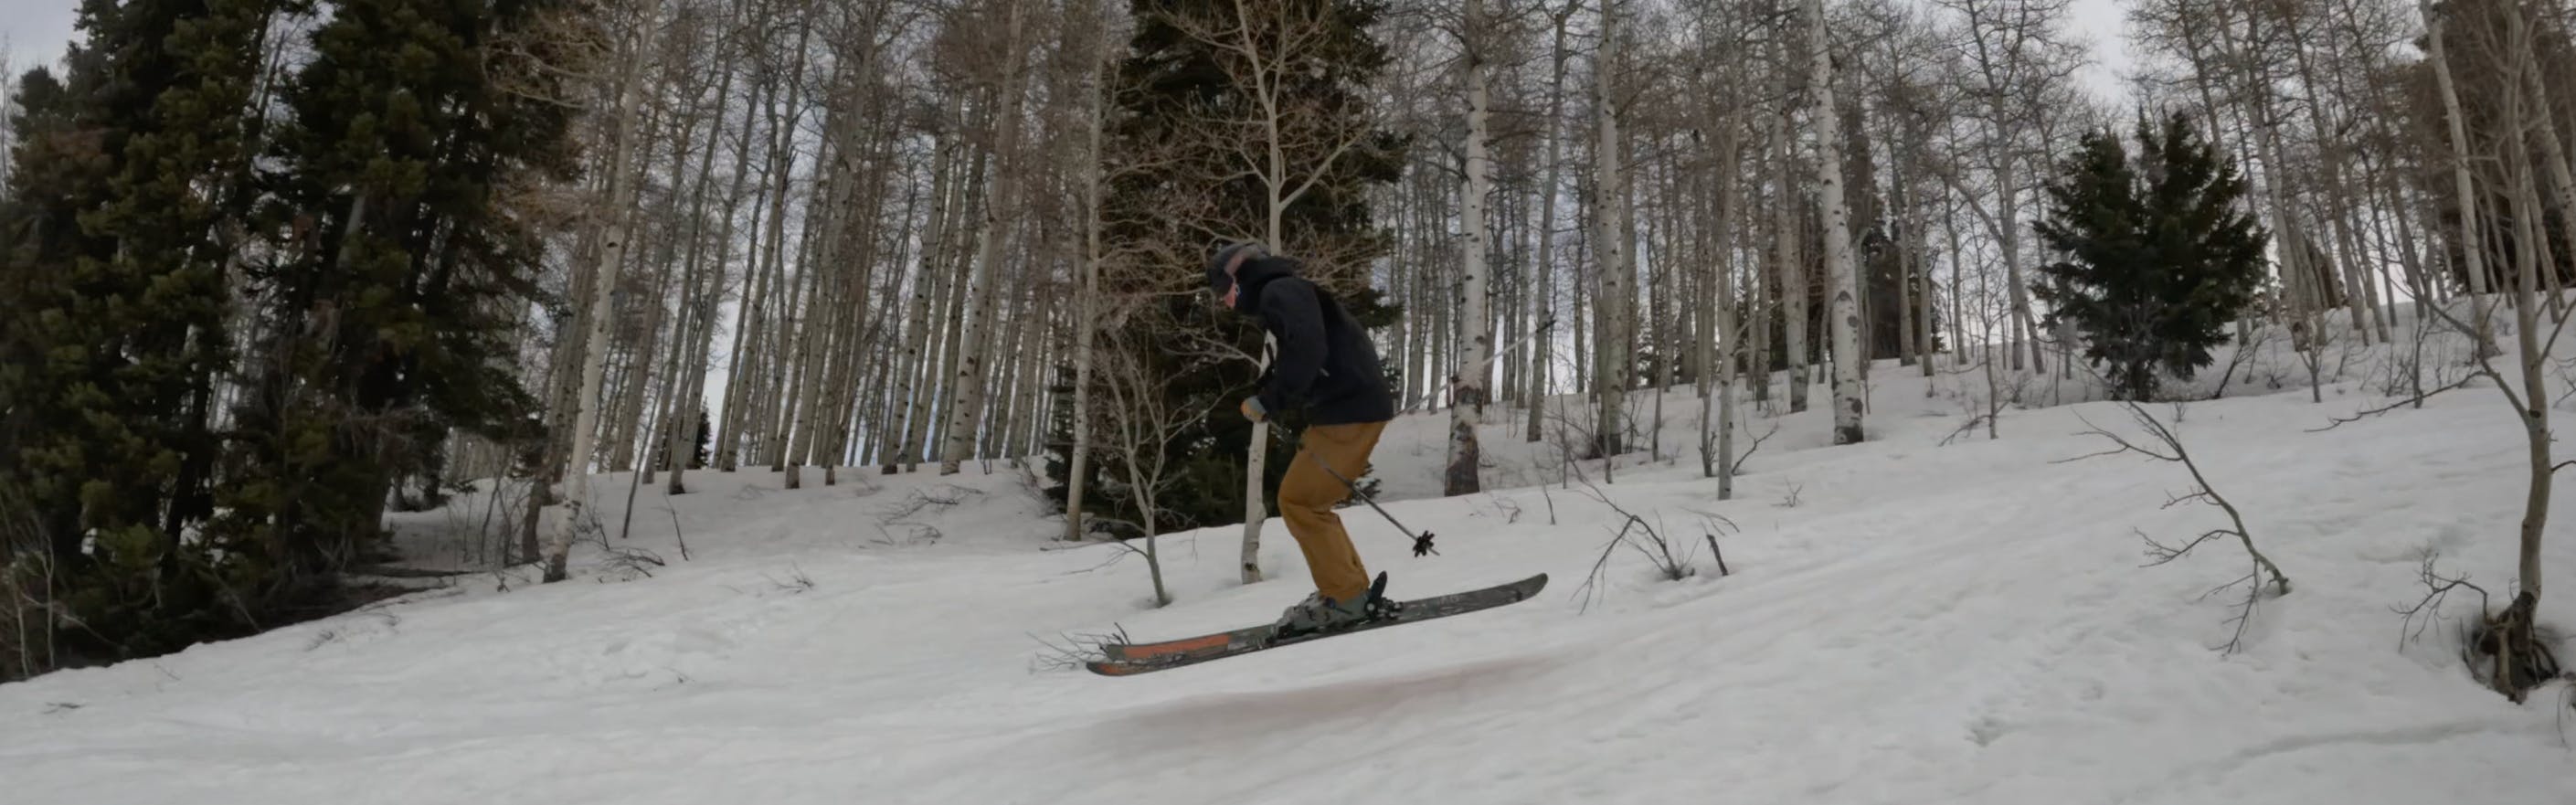 Curated Ski Expert Theo jumping with the 2023 K2 Reckoner 102 skis